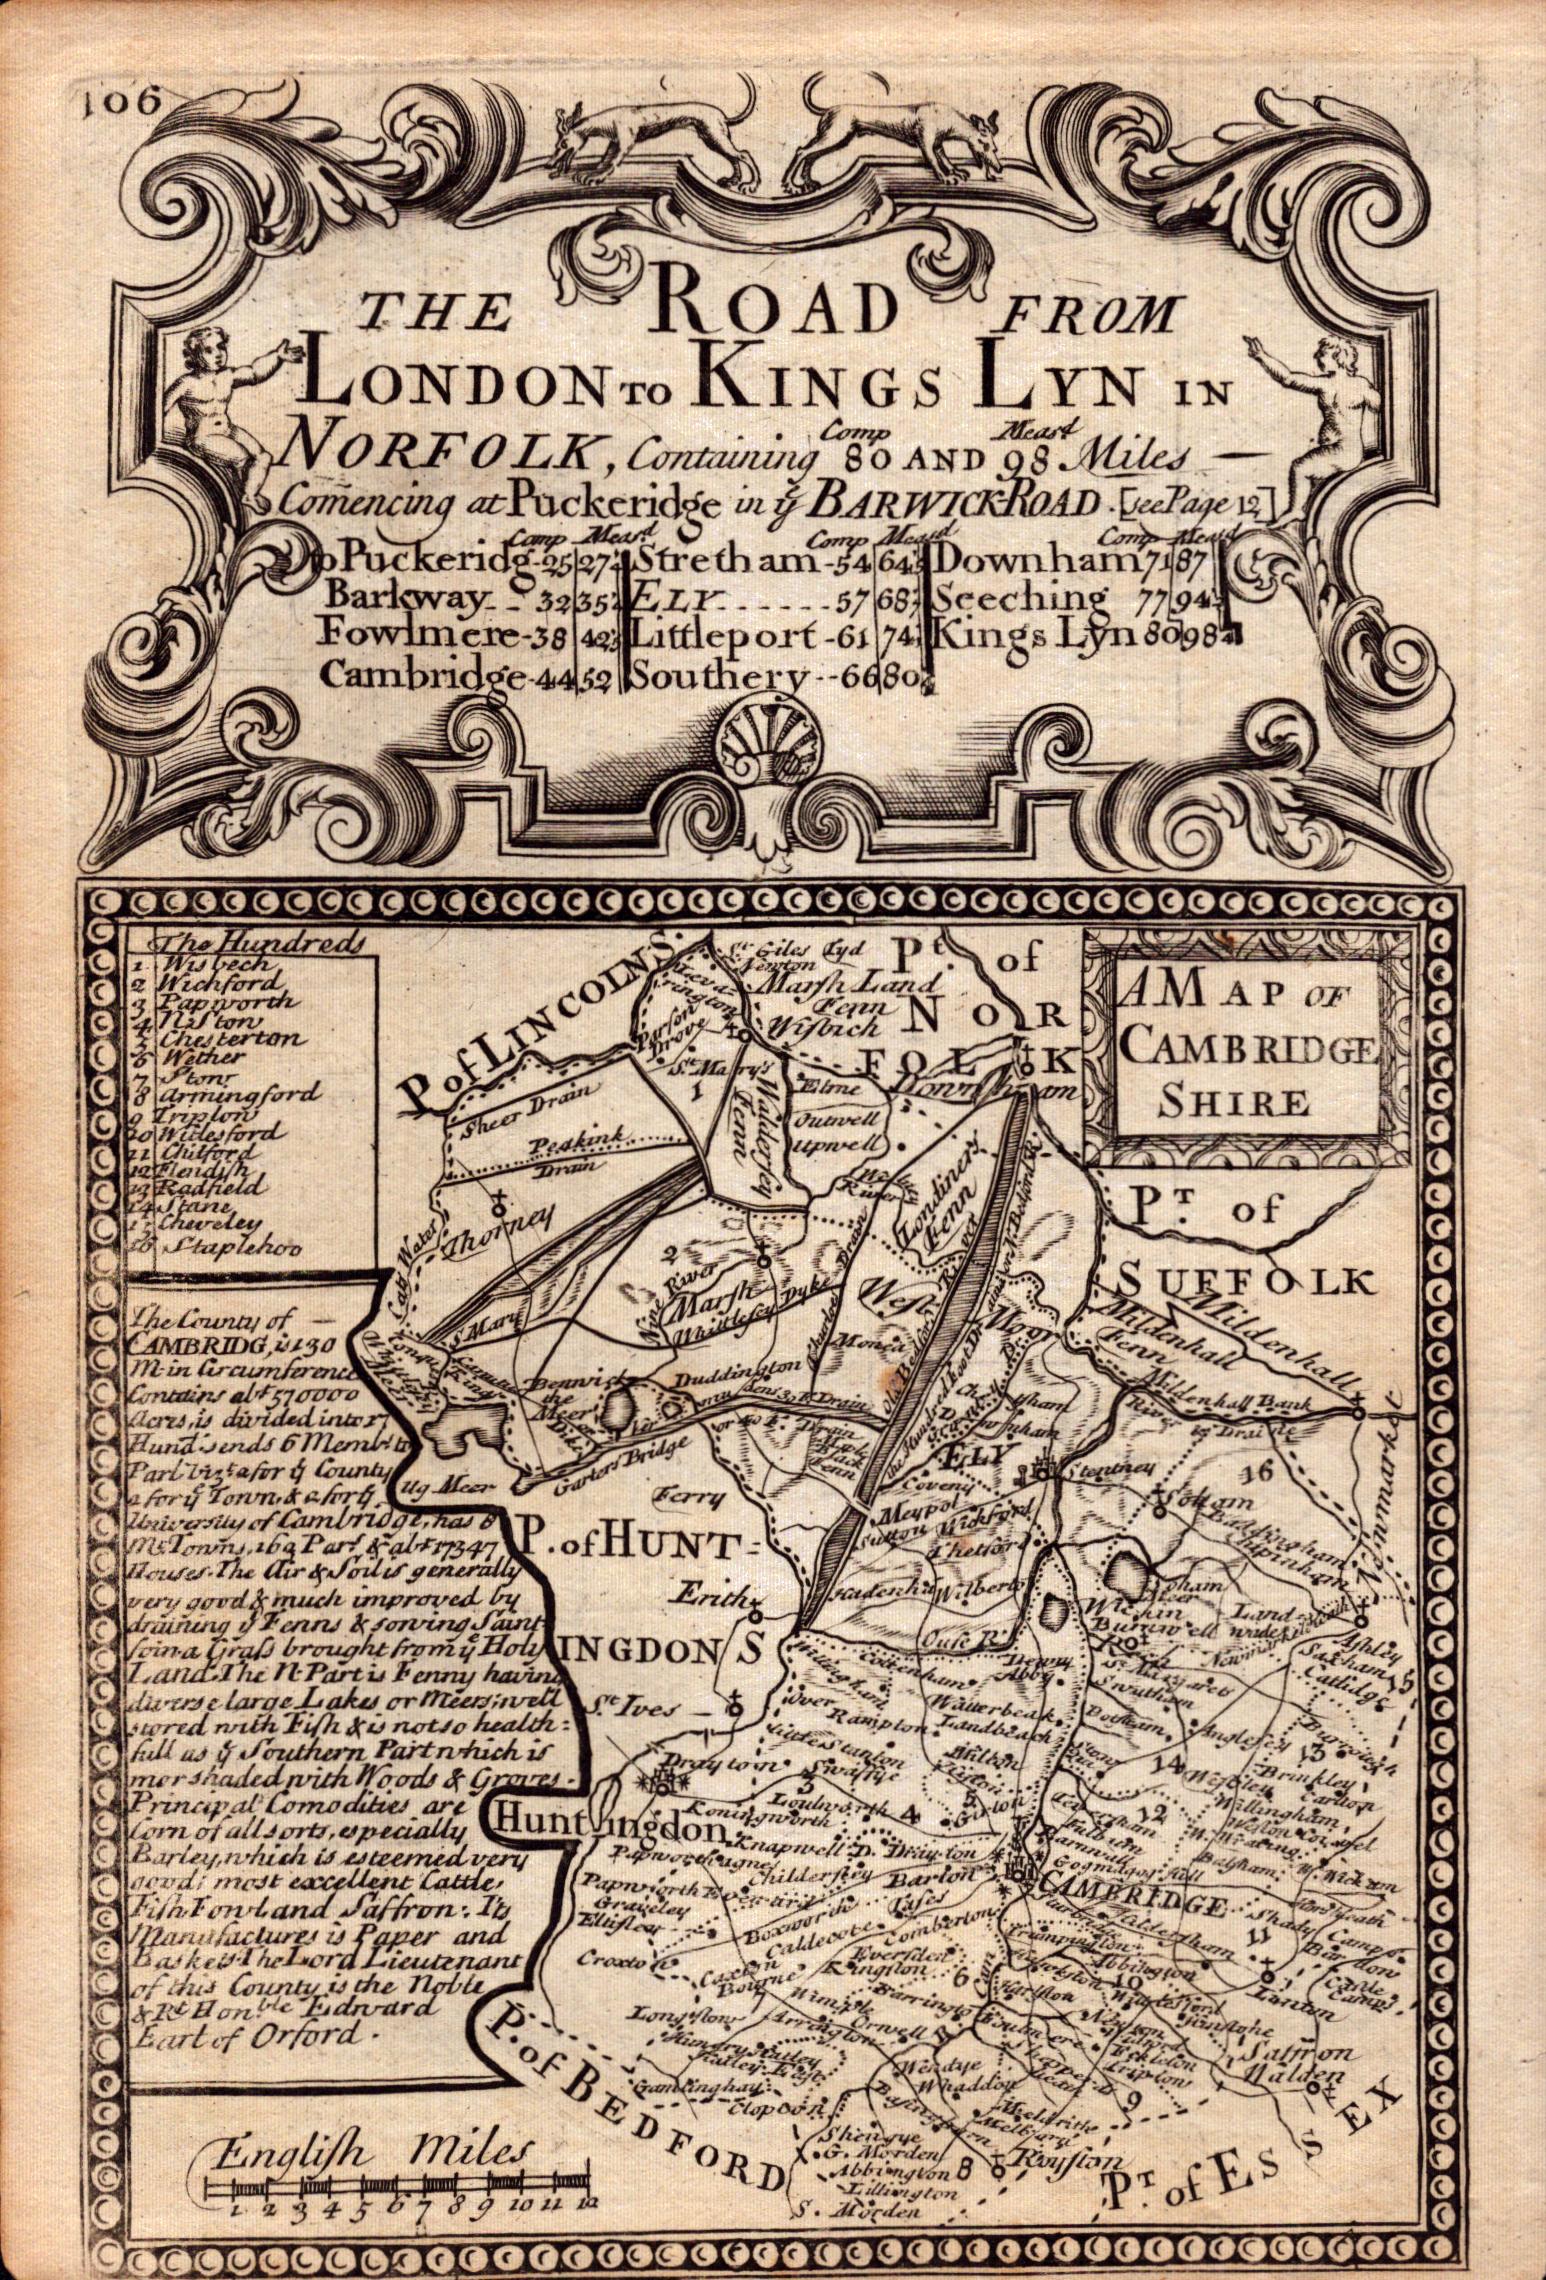 Bowen 290 Yrs Old Detailed Road Map The Road From London to Kings Lynn. - Image 2 of 4